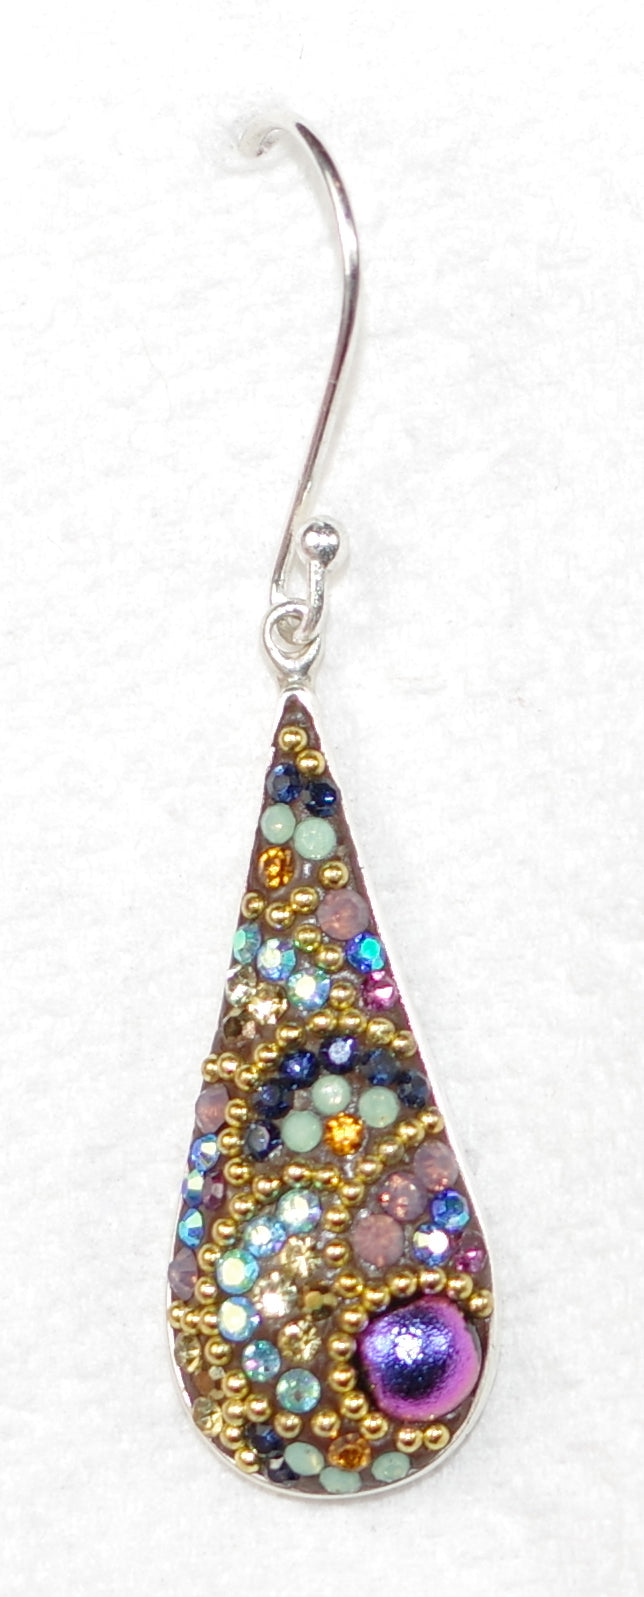 MOSAICO EARRINGS PE-8270-K: multi color Austrian crystals in 1" solid silver setting, french wire backs